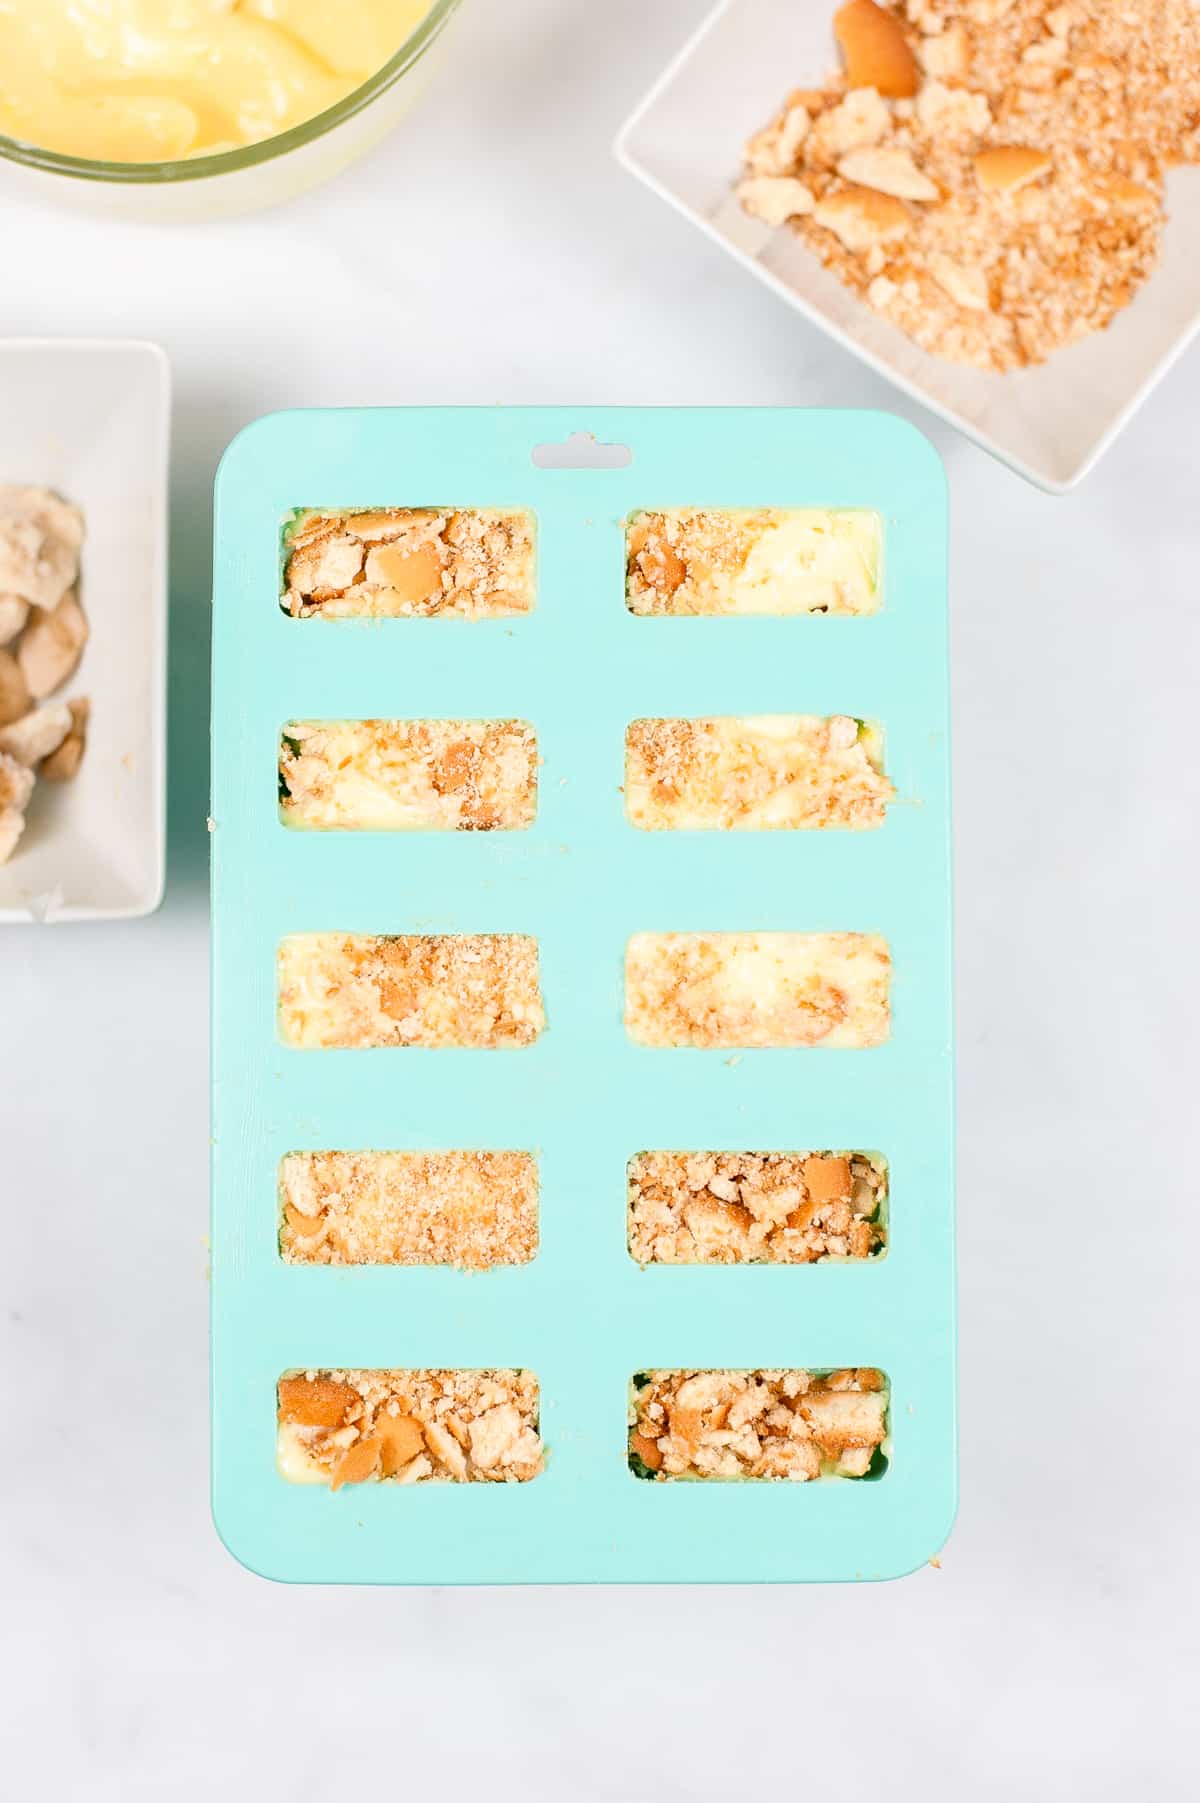 popsicle mold with cavities for 10 popsicles. Filled with banana cream pudding and vanilla wafer crumbles. More Nilla crumbs, banana slices, and pudding can be seen in background